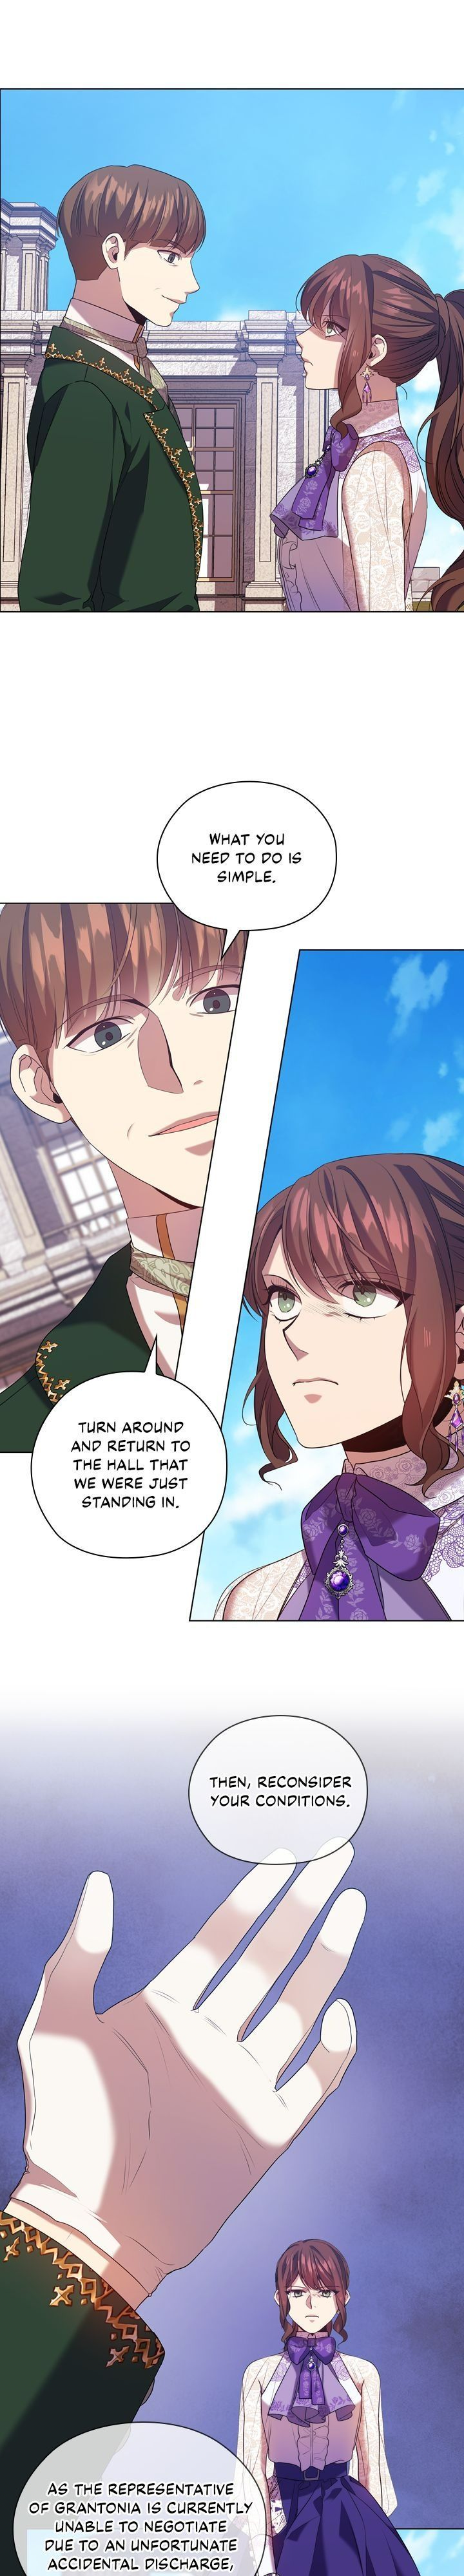 The Readymade Queen Chapter 82 page 6